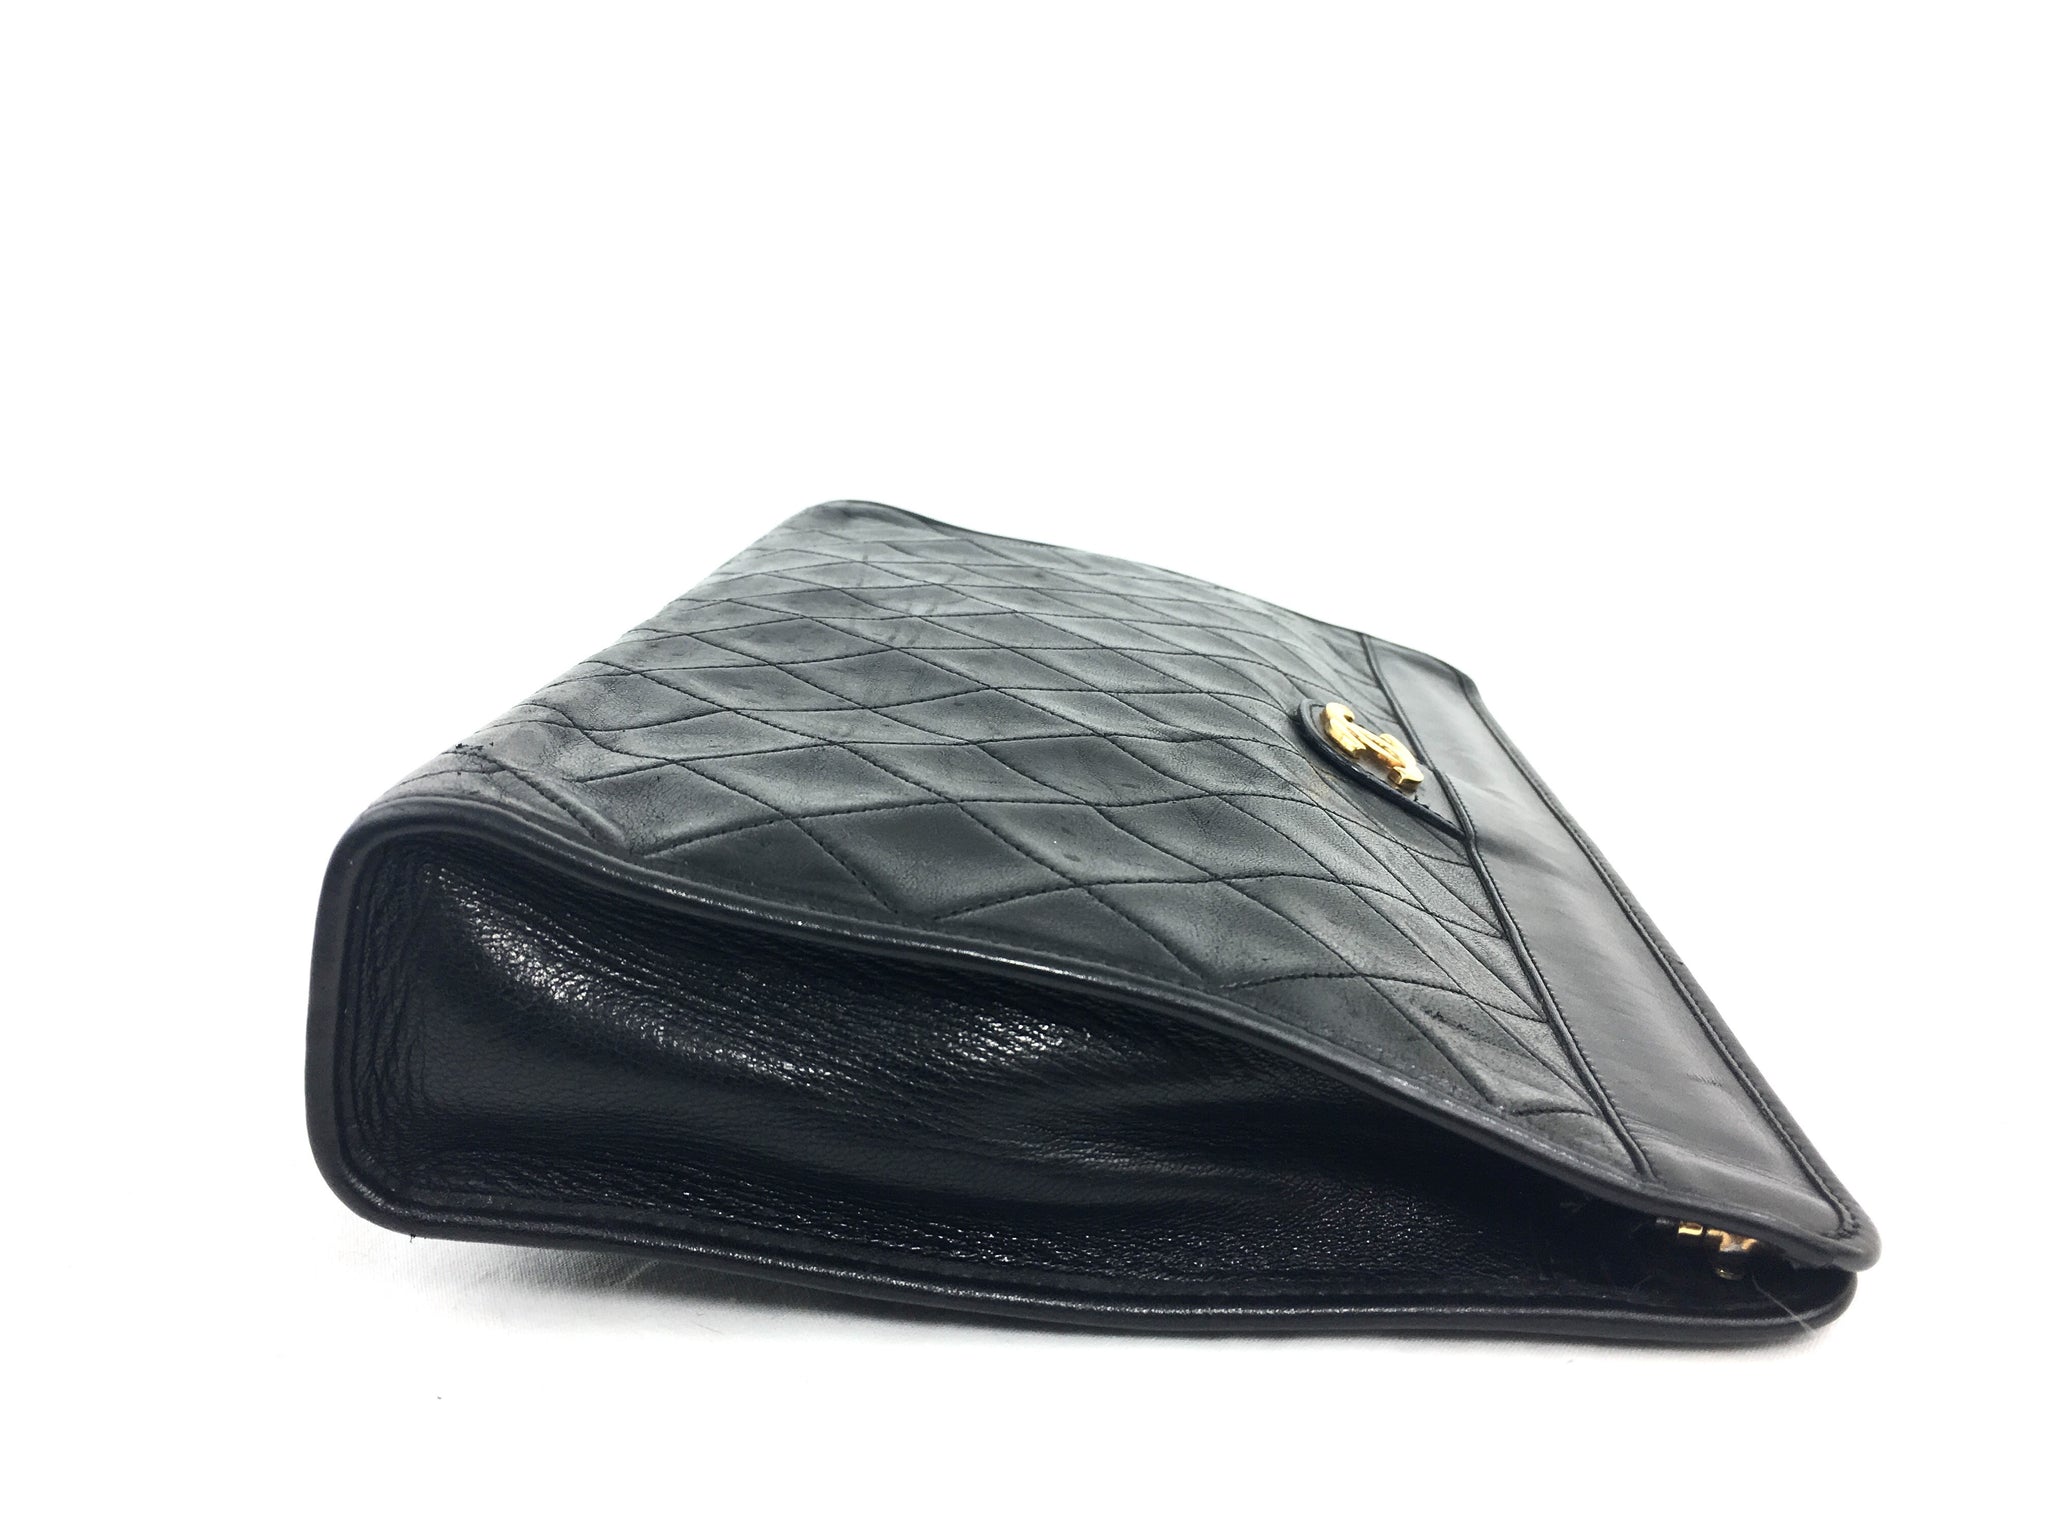 CHANEL Lambskin Black Quilted Evening Clutch